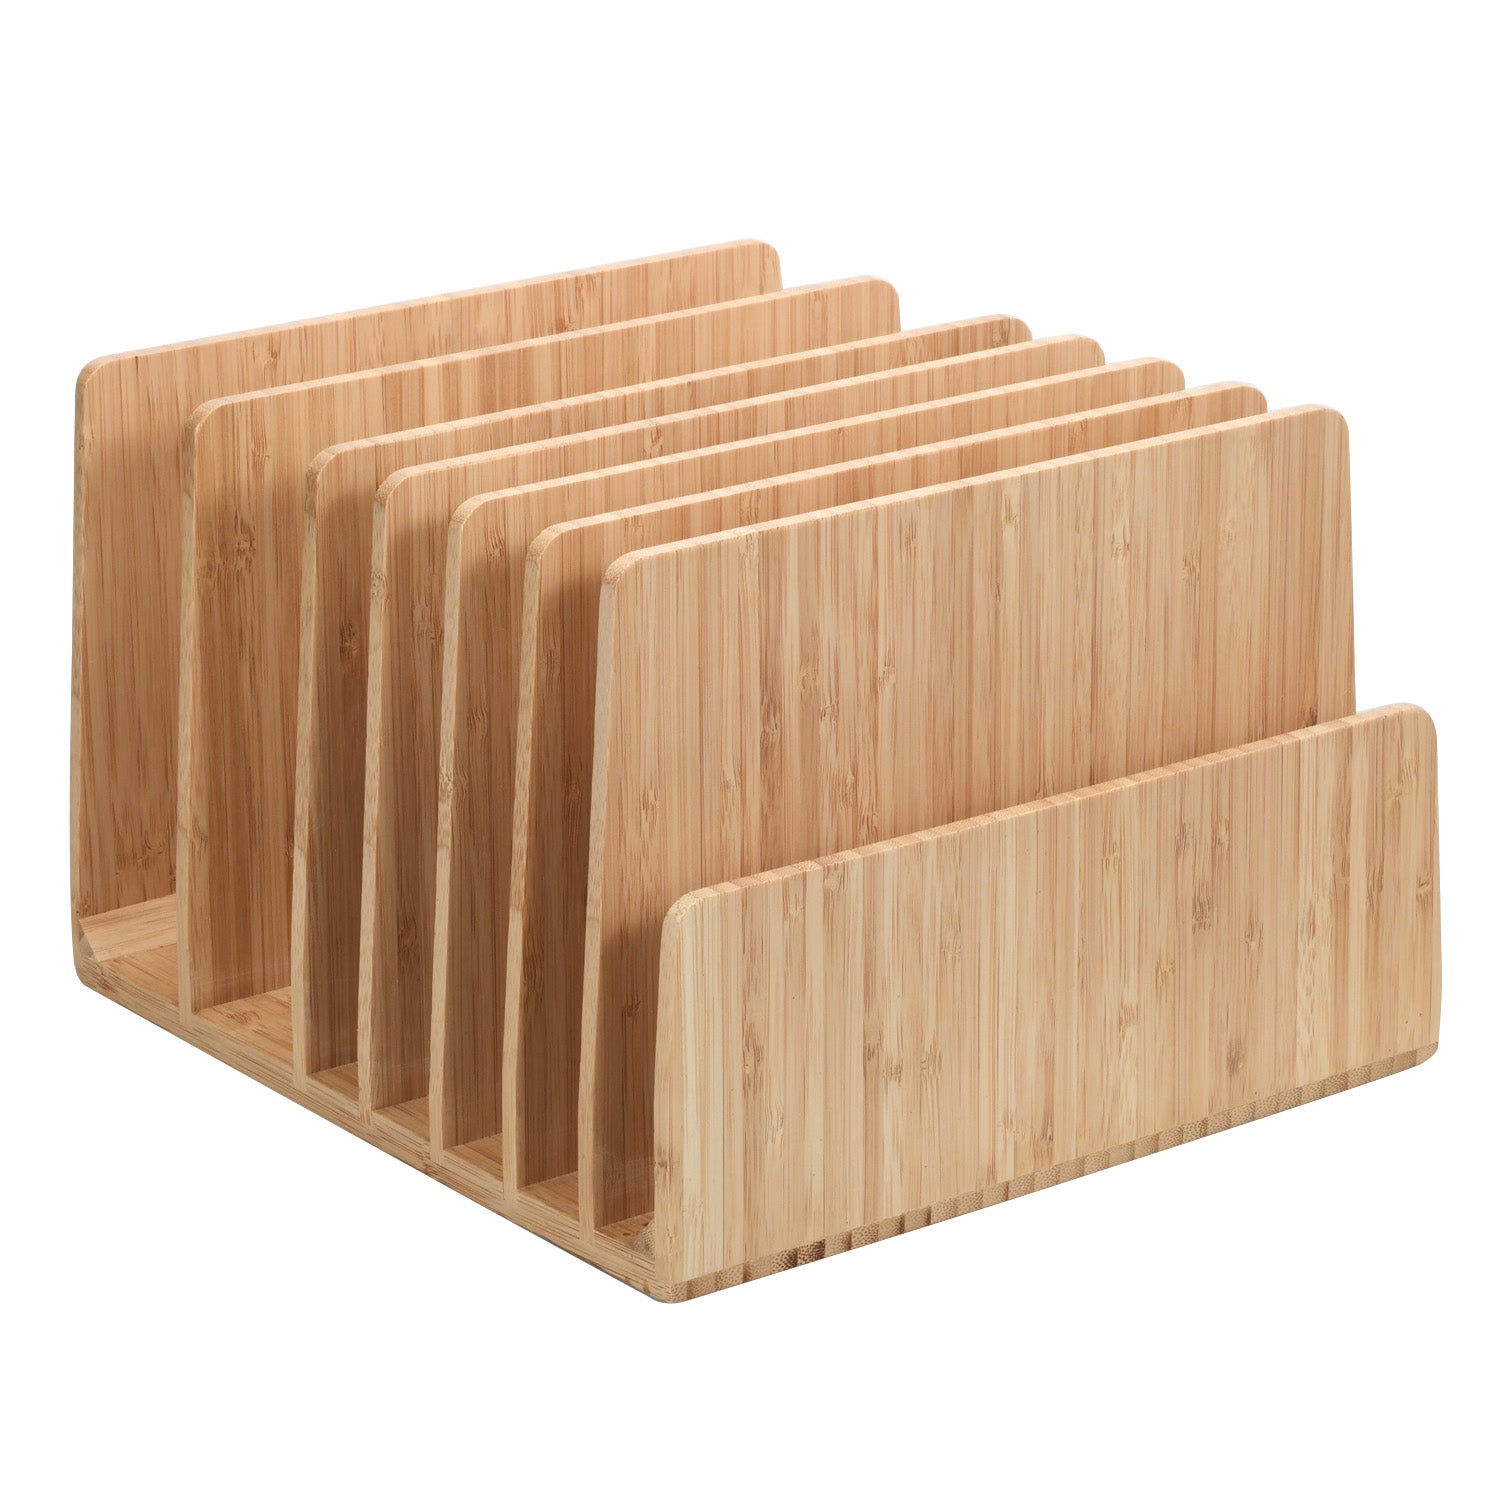 Bamboo 7 Slot Organizer with Extra Wide Slots